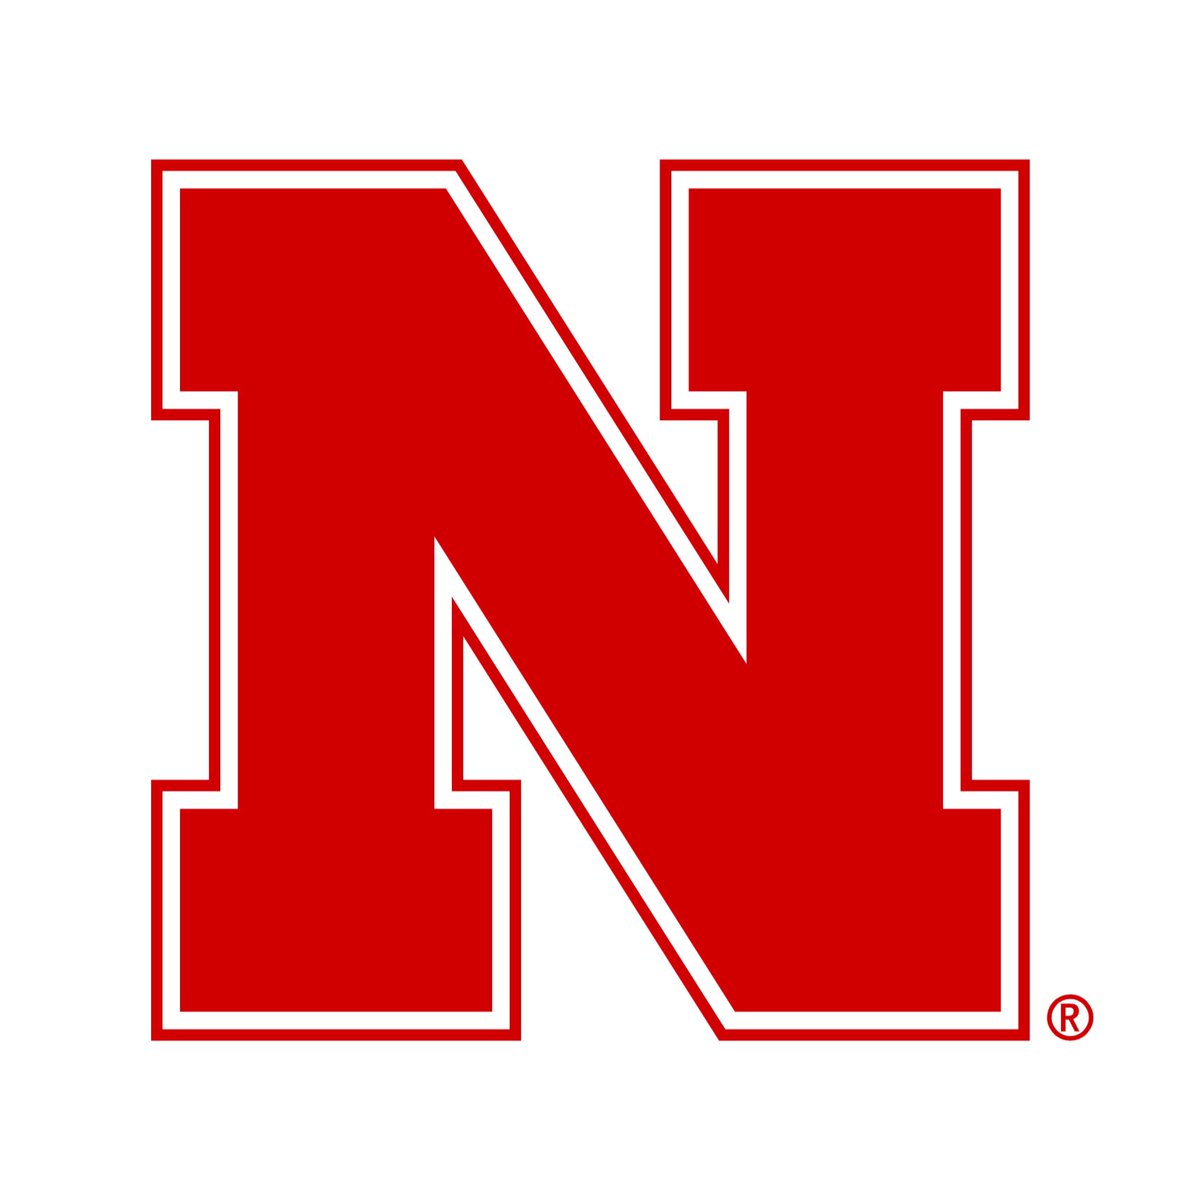 I will be at the Nebraska spring game this Saturday! @Coach_Satt @CoachMattRhule @HuskerFootball @rex_guthrie @TannerTerch super excited to see what Nebraska football is all about!